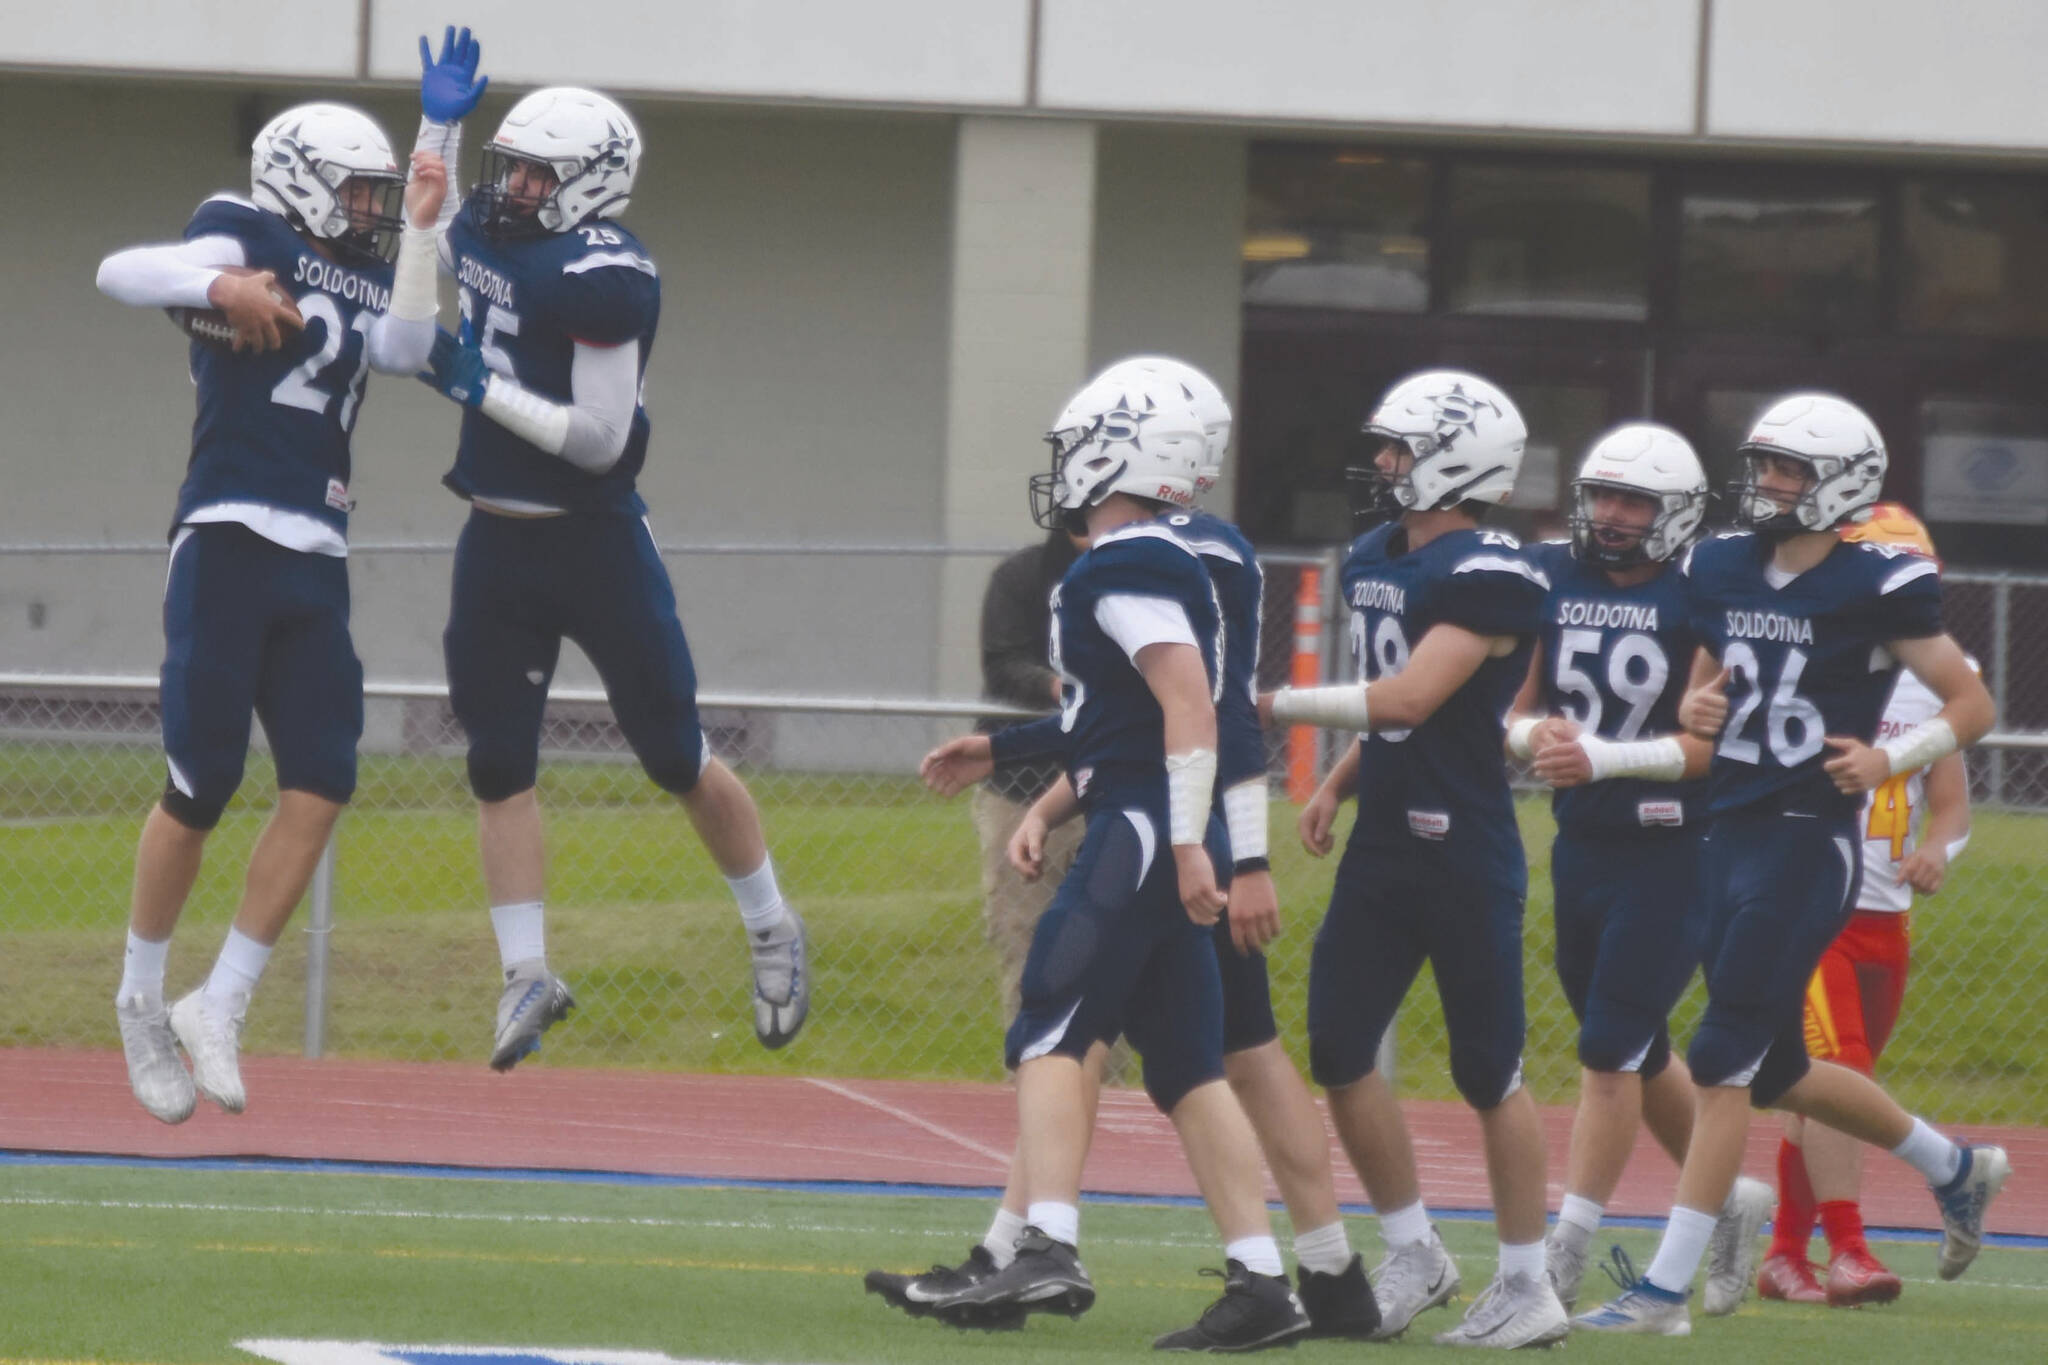 Brayden Taylor and Gehret Medcoff celebrate a touchdown on Friday, Aug. 26, 2022, at Justin Maile Field at Soldotna High School in Soldotna, Alaska. (Jake Dye/Peninsula Clarion)